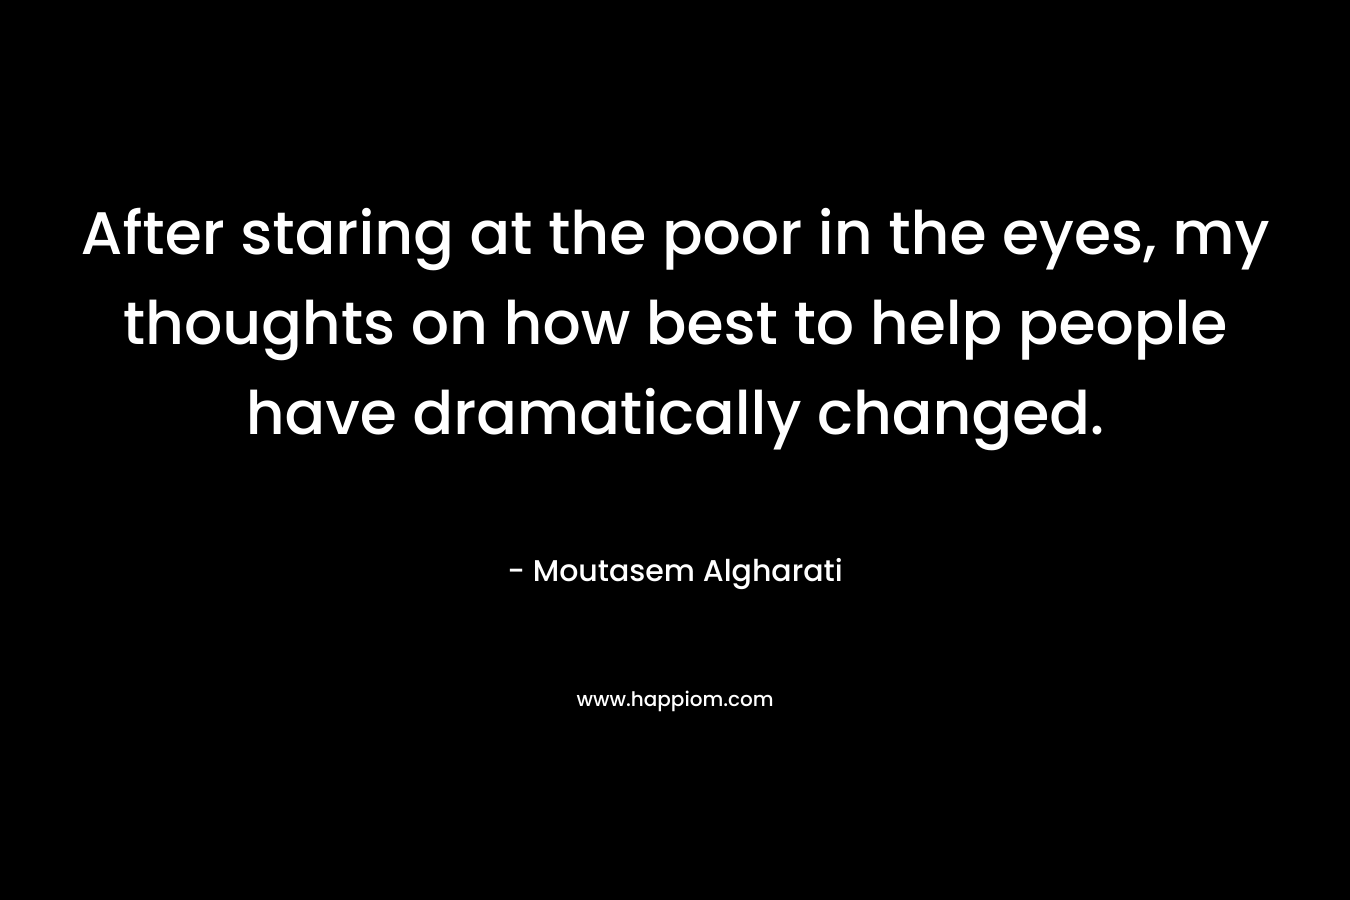 After staring at the poor in the eyes, my thoughts on how best to help people have dramatically changed. – Moutasem Algharati